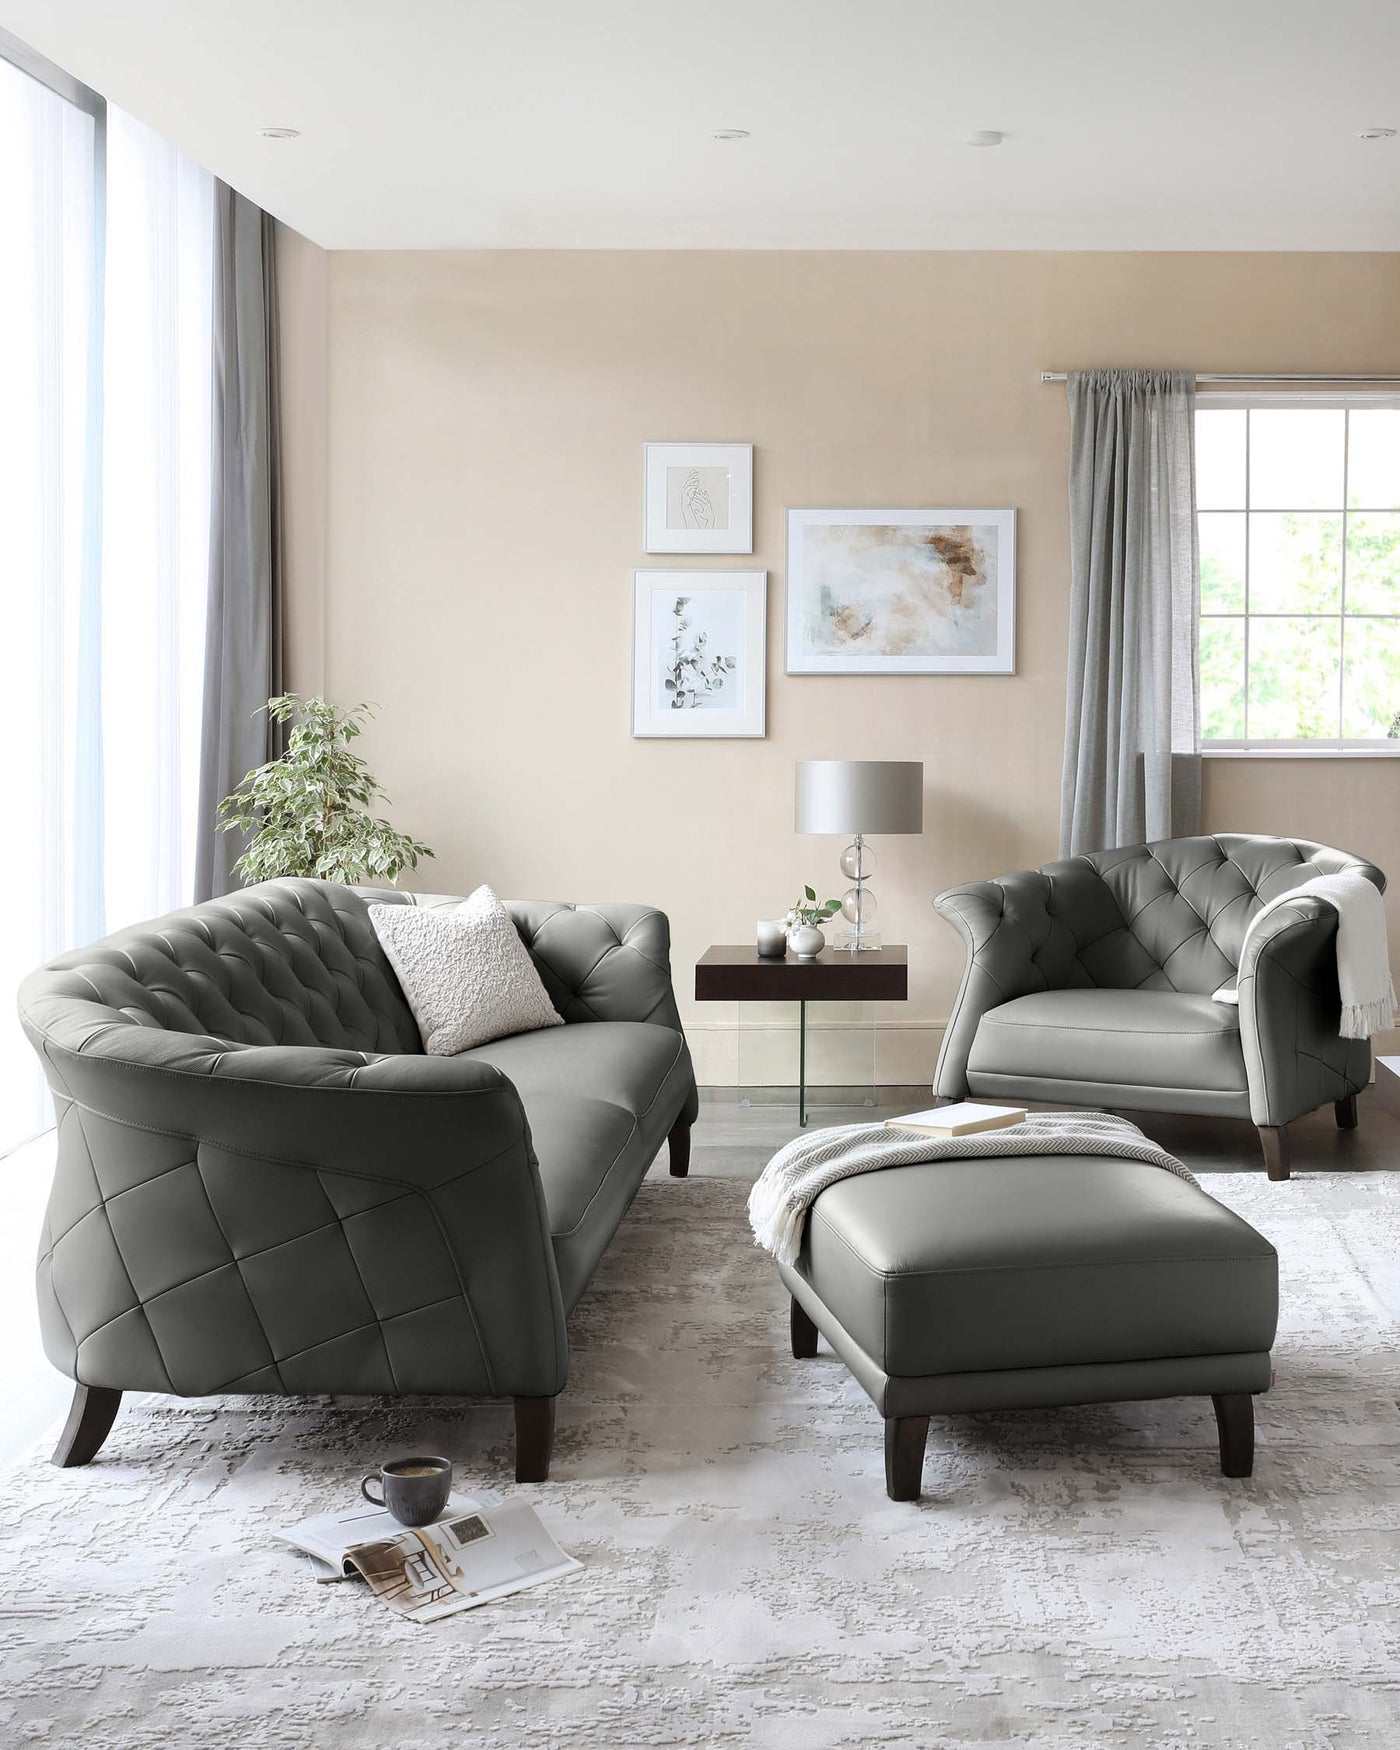 Elegant living room furniture set featuring a tufted charcoal grey sofa with matching armchair and ottoman, all with dark wooden legs. A contemporary side table with a lamp and decorative items, along with a light grey textured area rug, complete the ensemble.